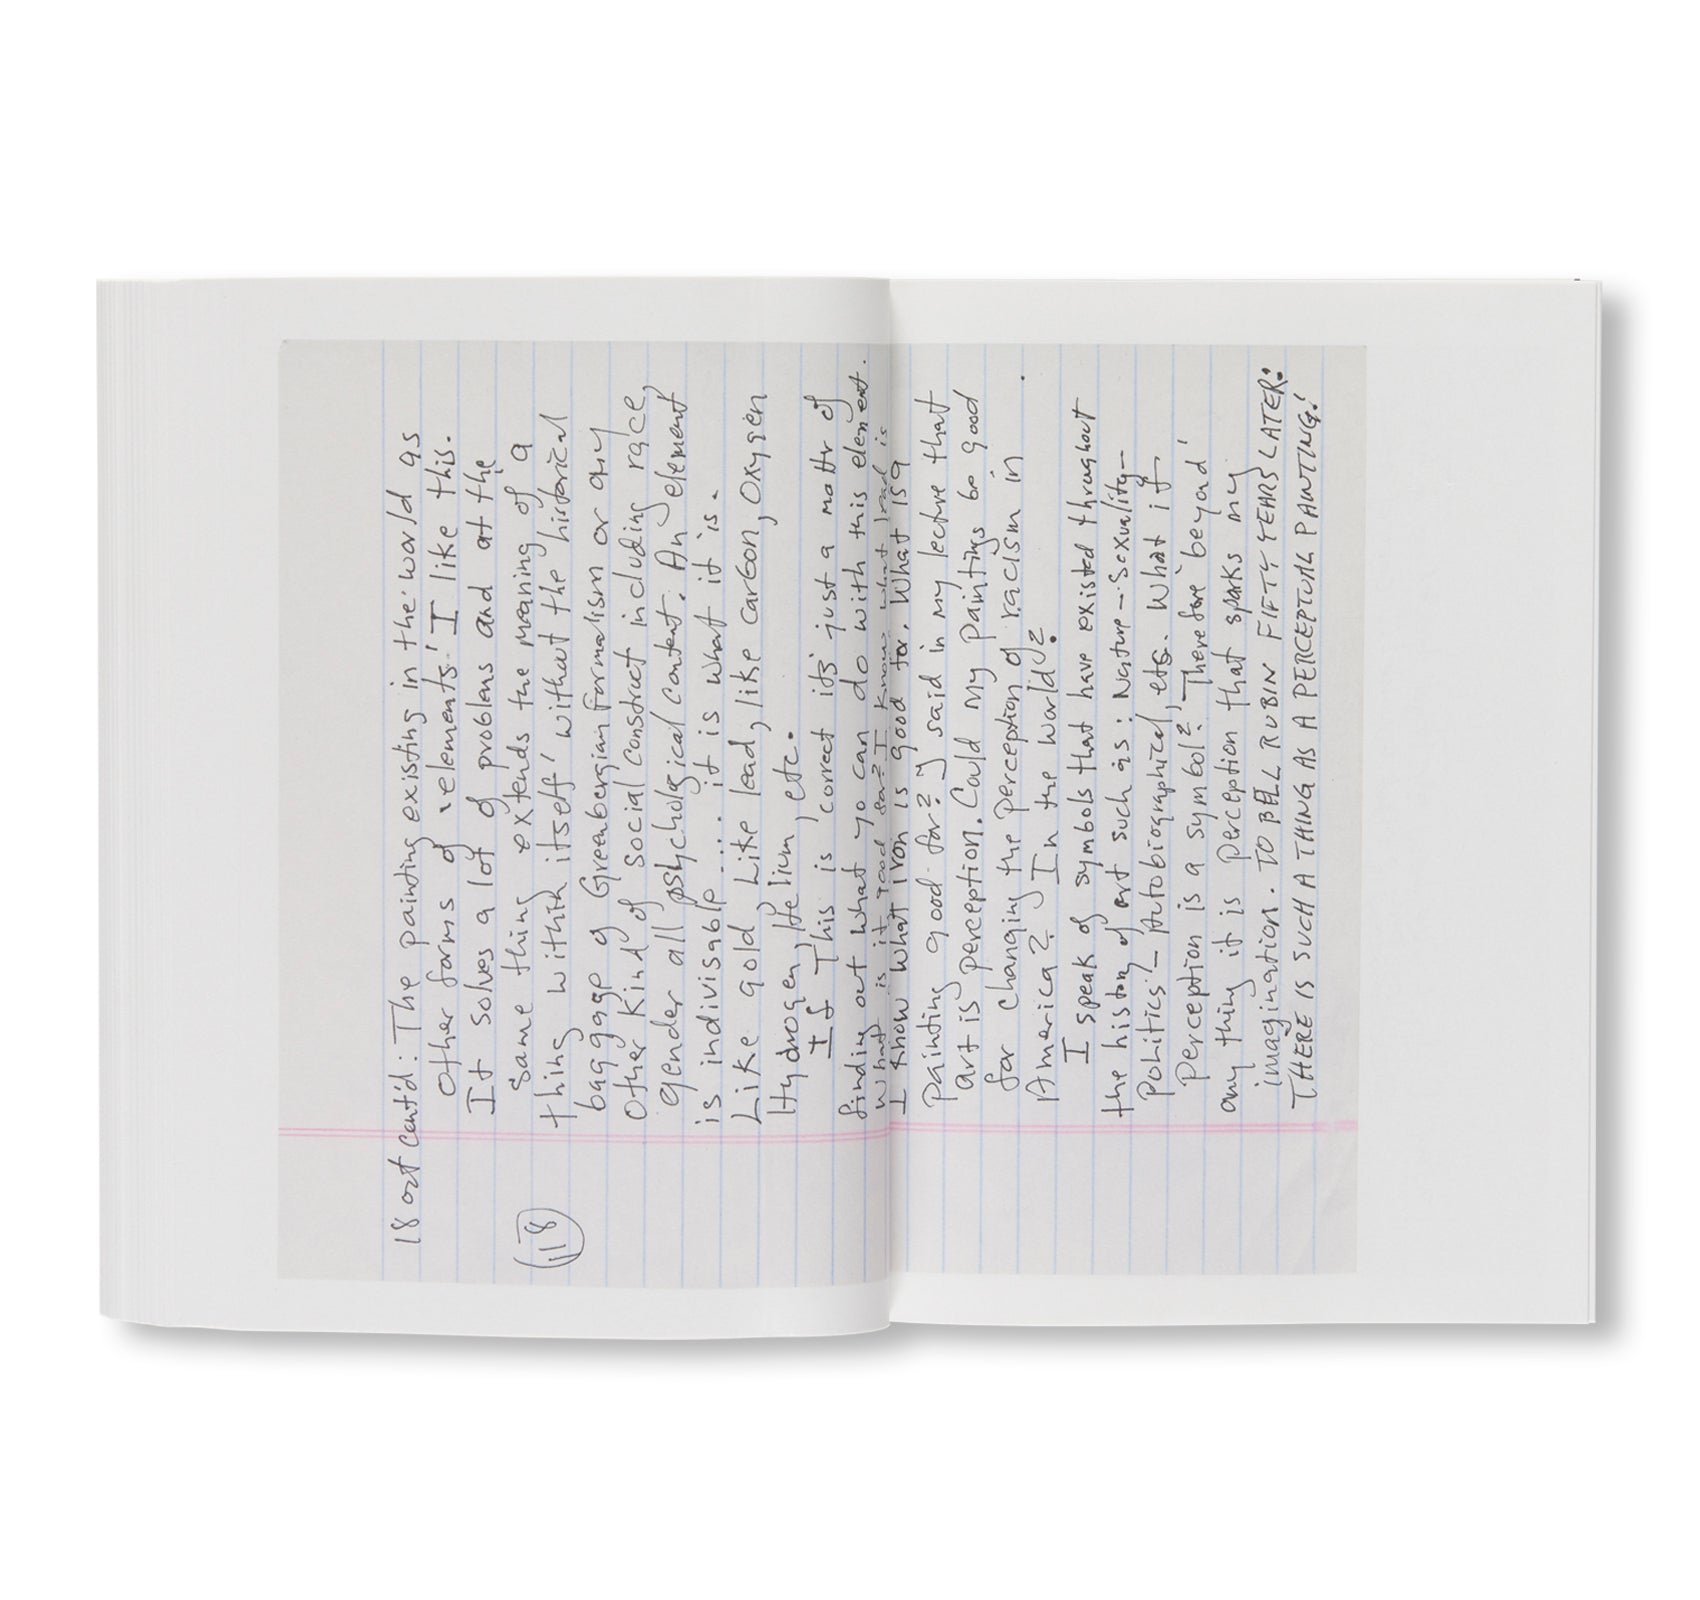 NOTES FROM THE WOODSHED by Jack Whitten